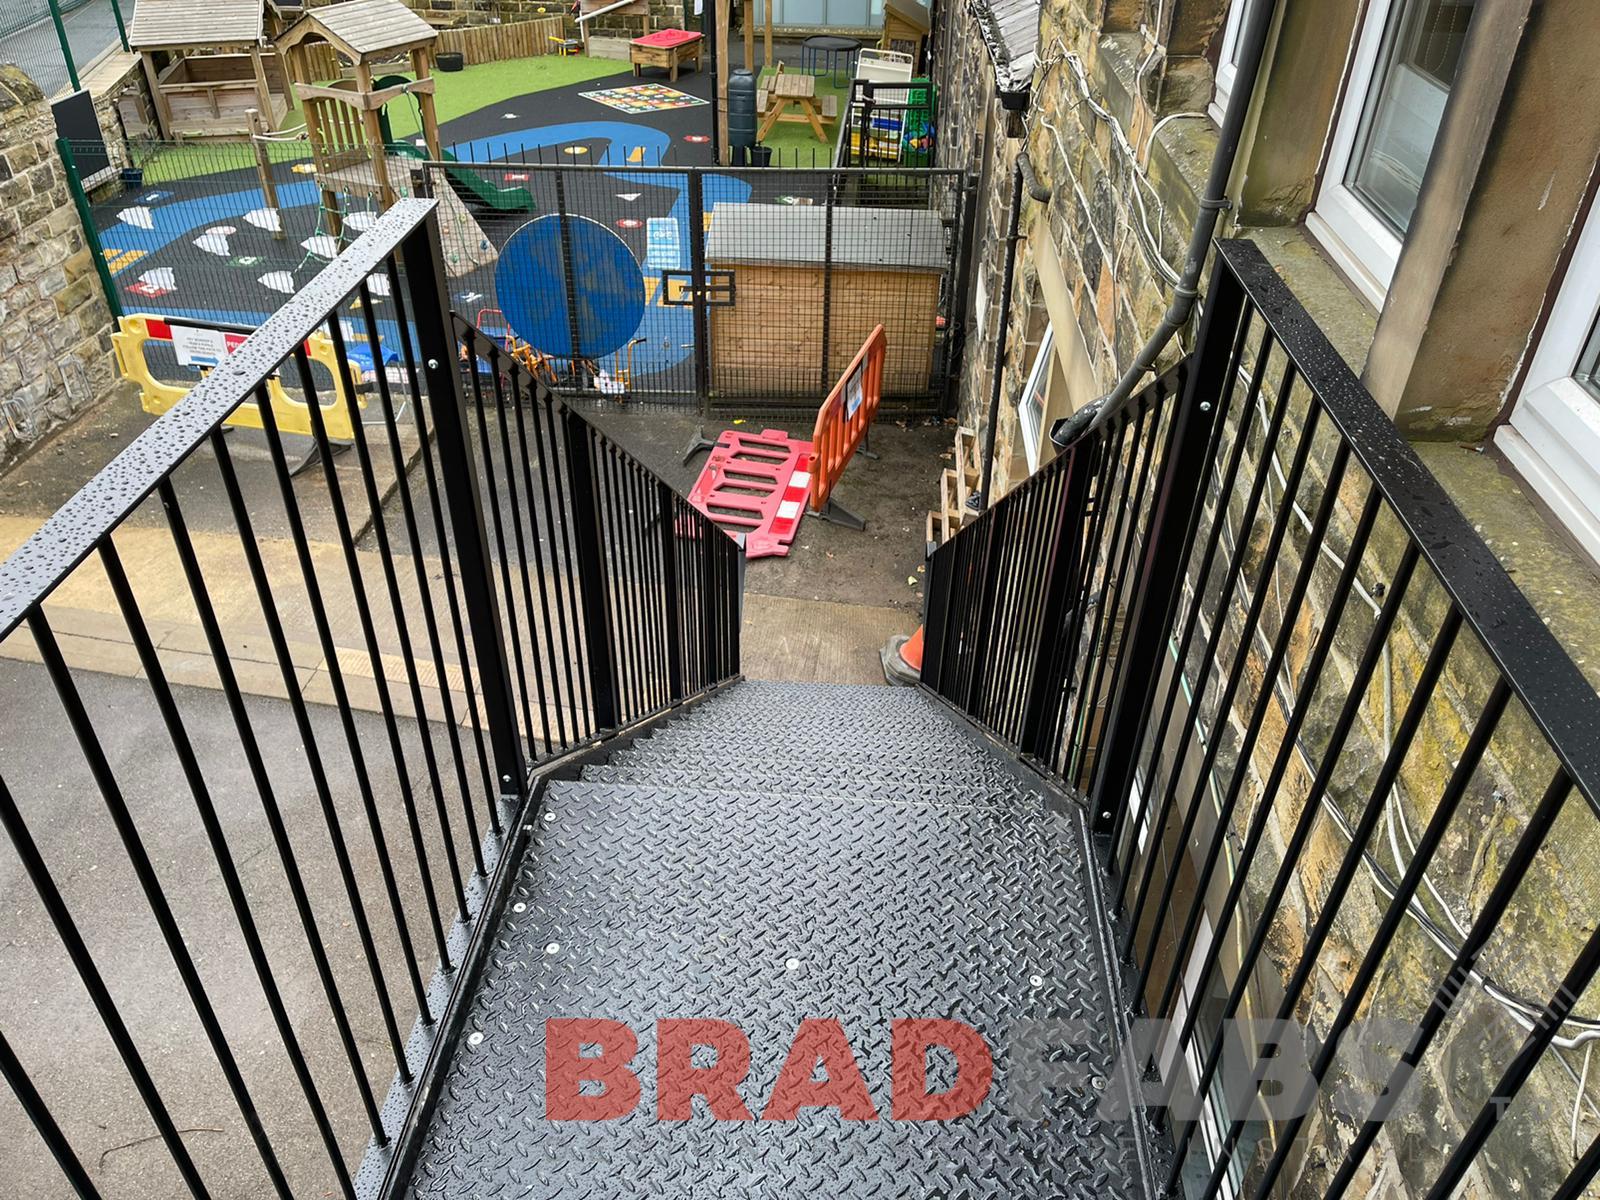 External School Fire Escape Staircase in mild steel, galvanised and powder coated with vertical bar balustrade and durbar treads manufactured and installed by School Experts Bradfabs